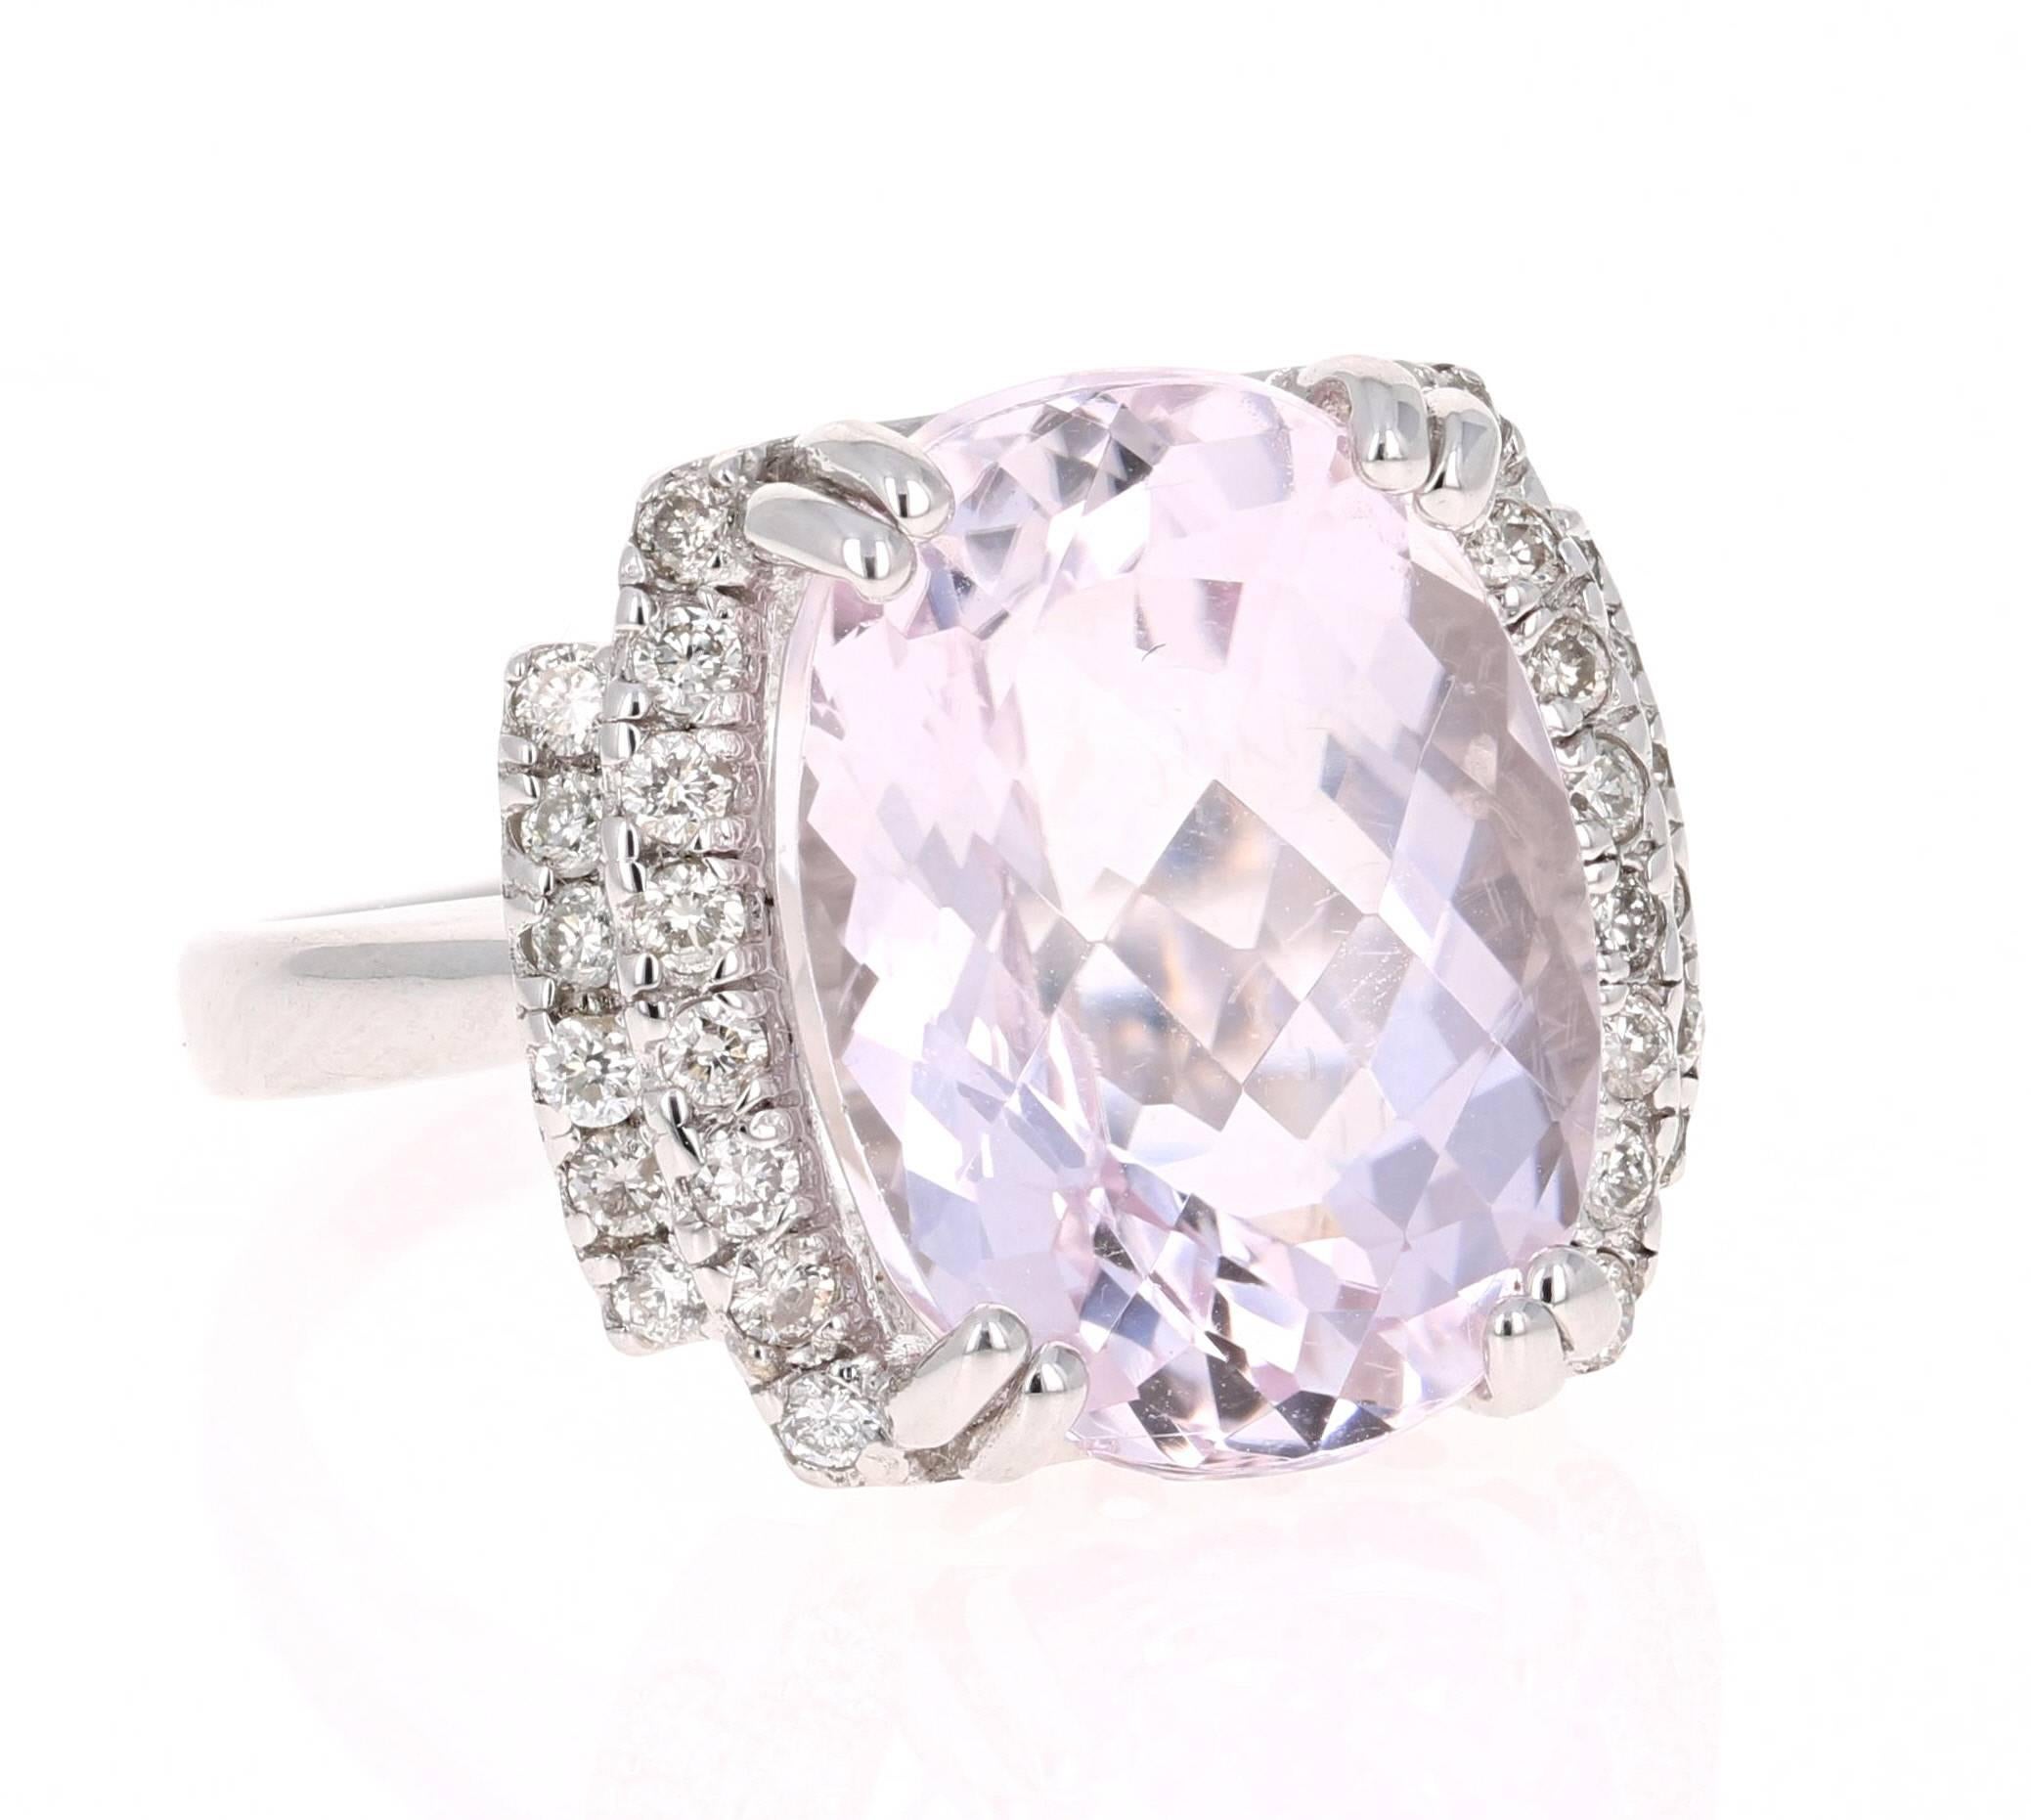 This stunning piece has a large 11.57 carat Kunzite that is set in the center of the ring, it is surrounded by 28 Round Cut Diamonds that weigh 0.44 carats.  The total carat weight of the ring is 12.01 carats. 

The ring is curated in 14K White gold